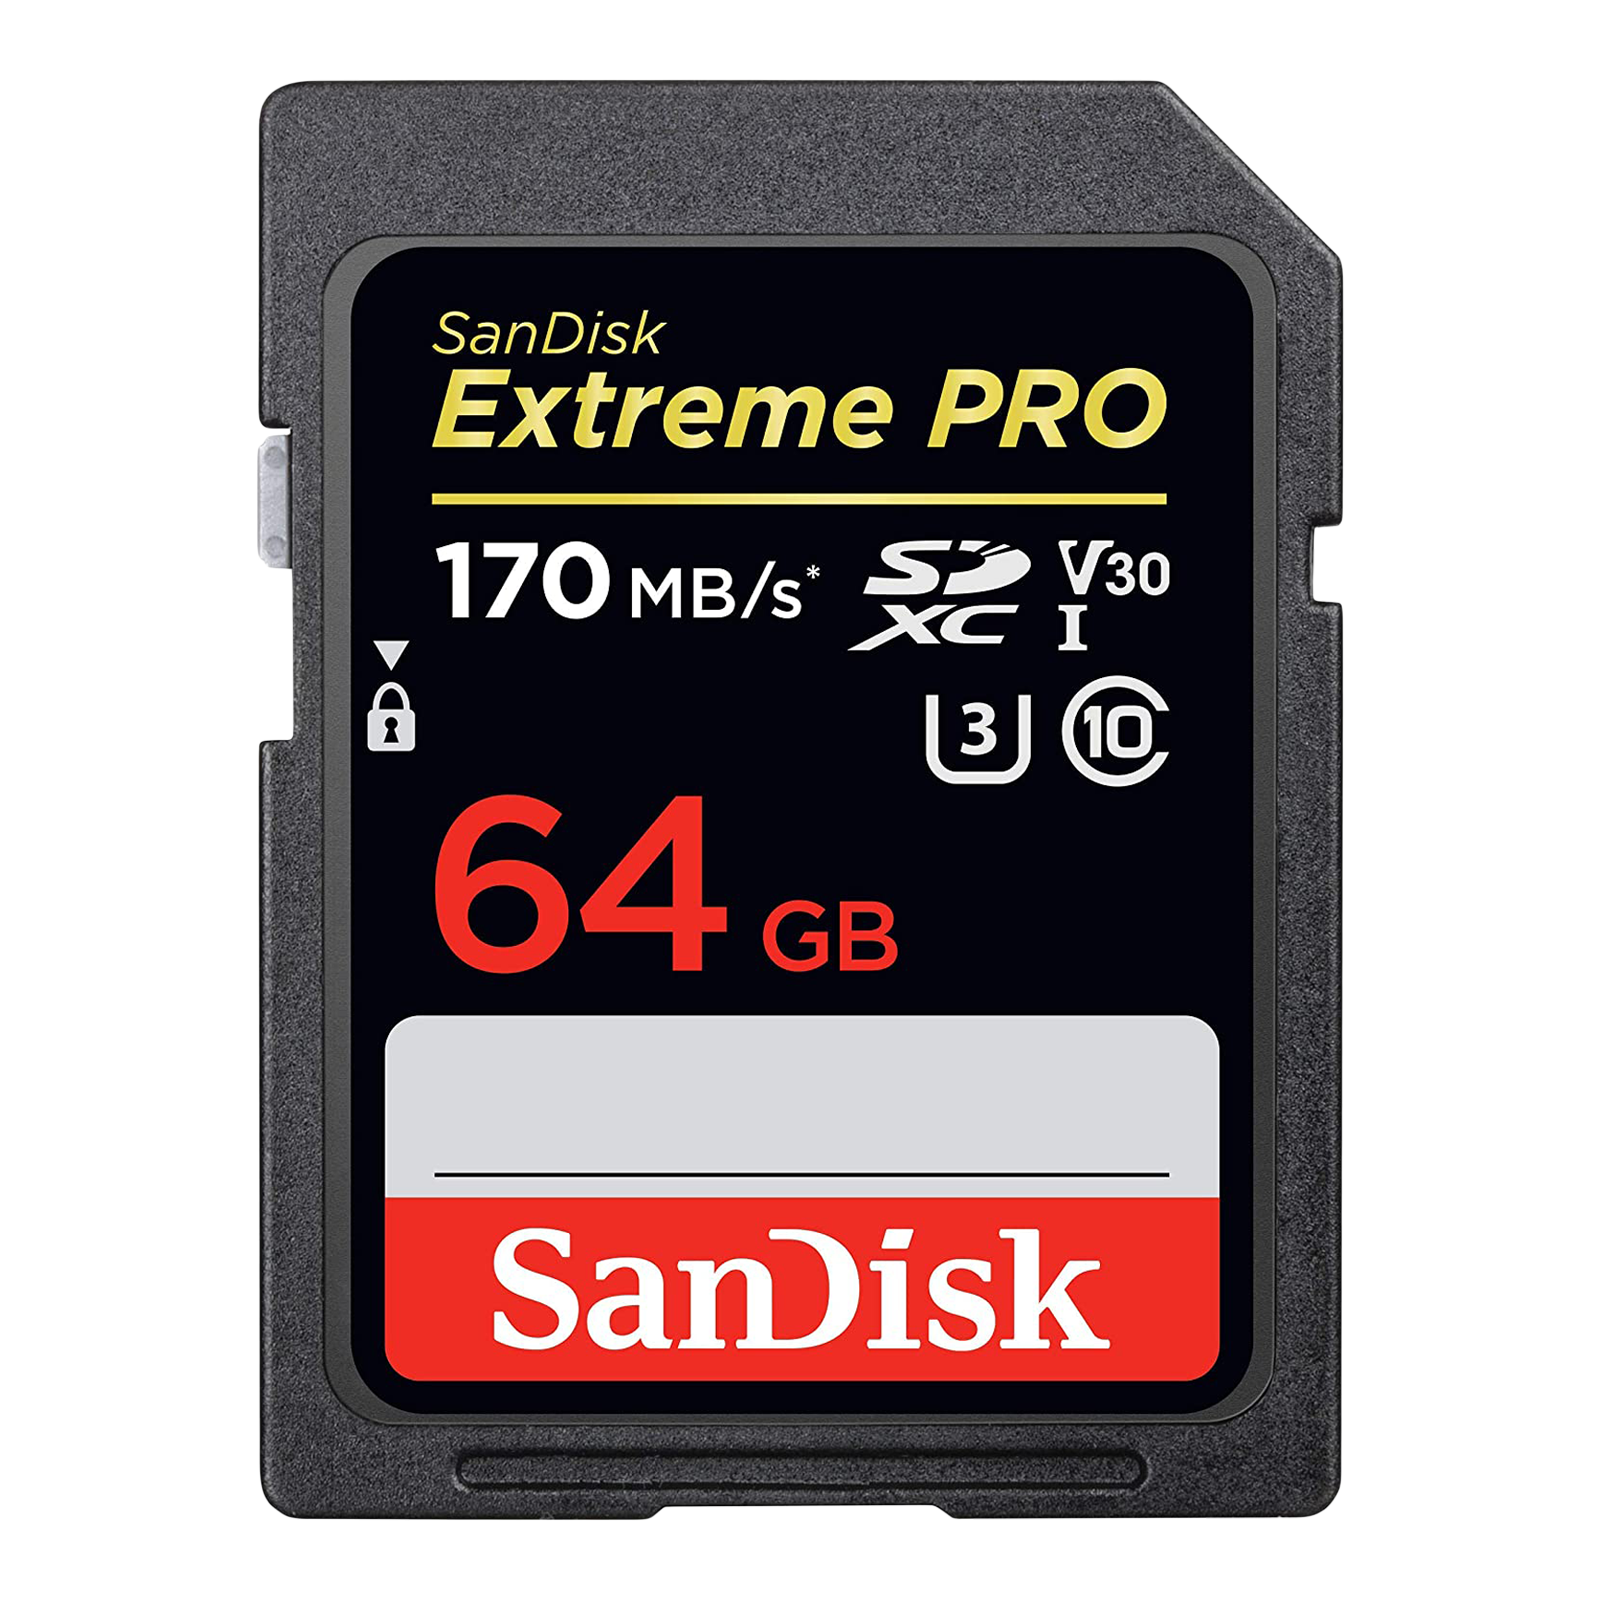 SanDisk Extreme Pro SDXC 64GB Class 10 170MB/s Memory Card